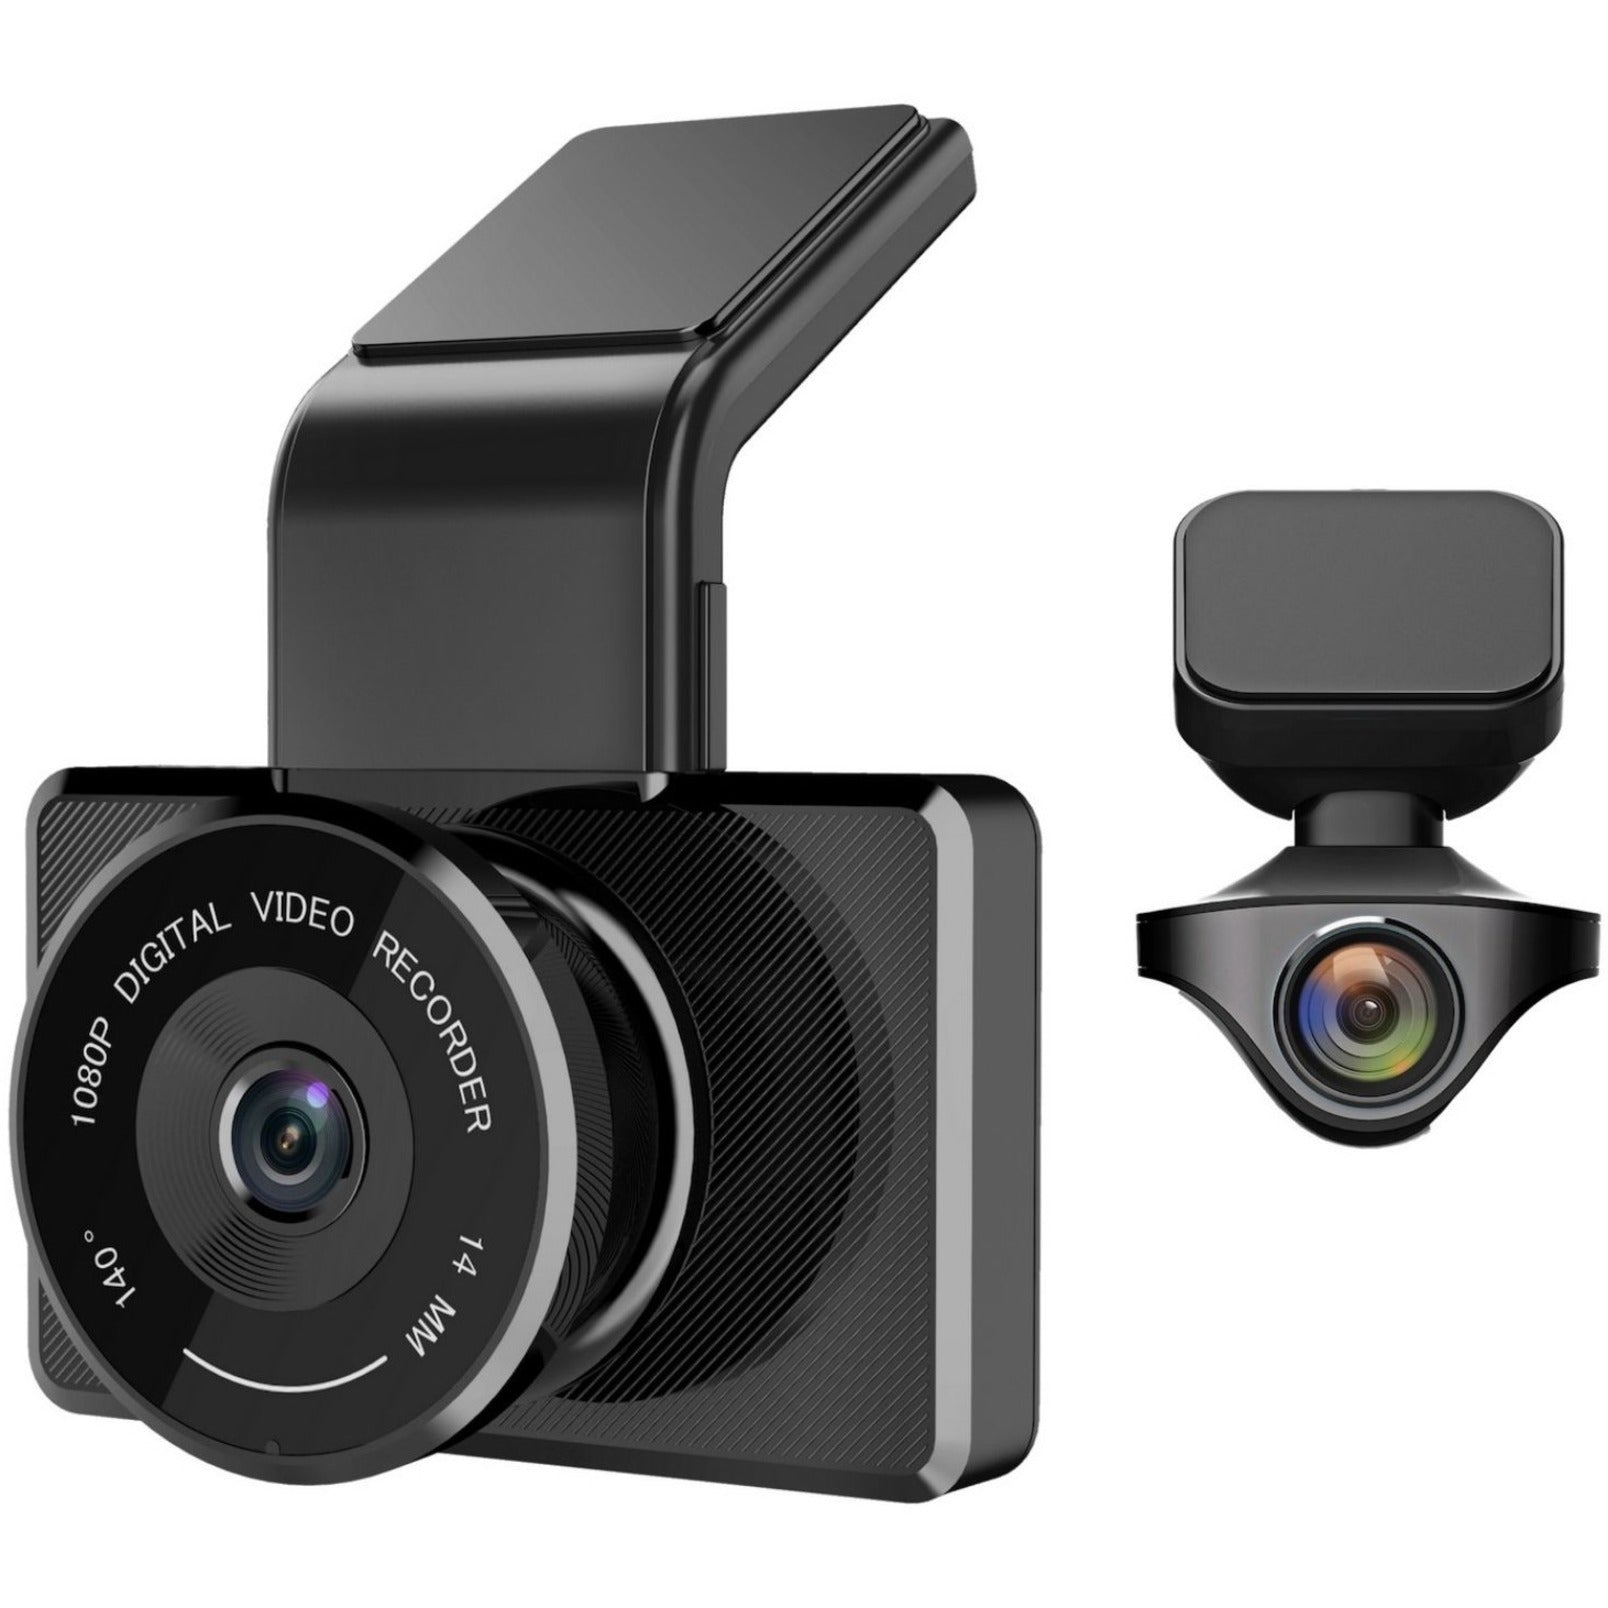 myGEKOgear GO95016G Orbit 950 Vehicle Camera, Full HD Dash Cam with GPS Logging, Wide Angle View, Driver Assist Features